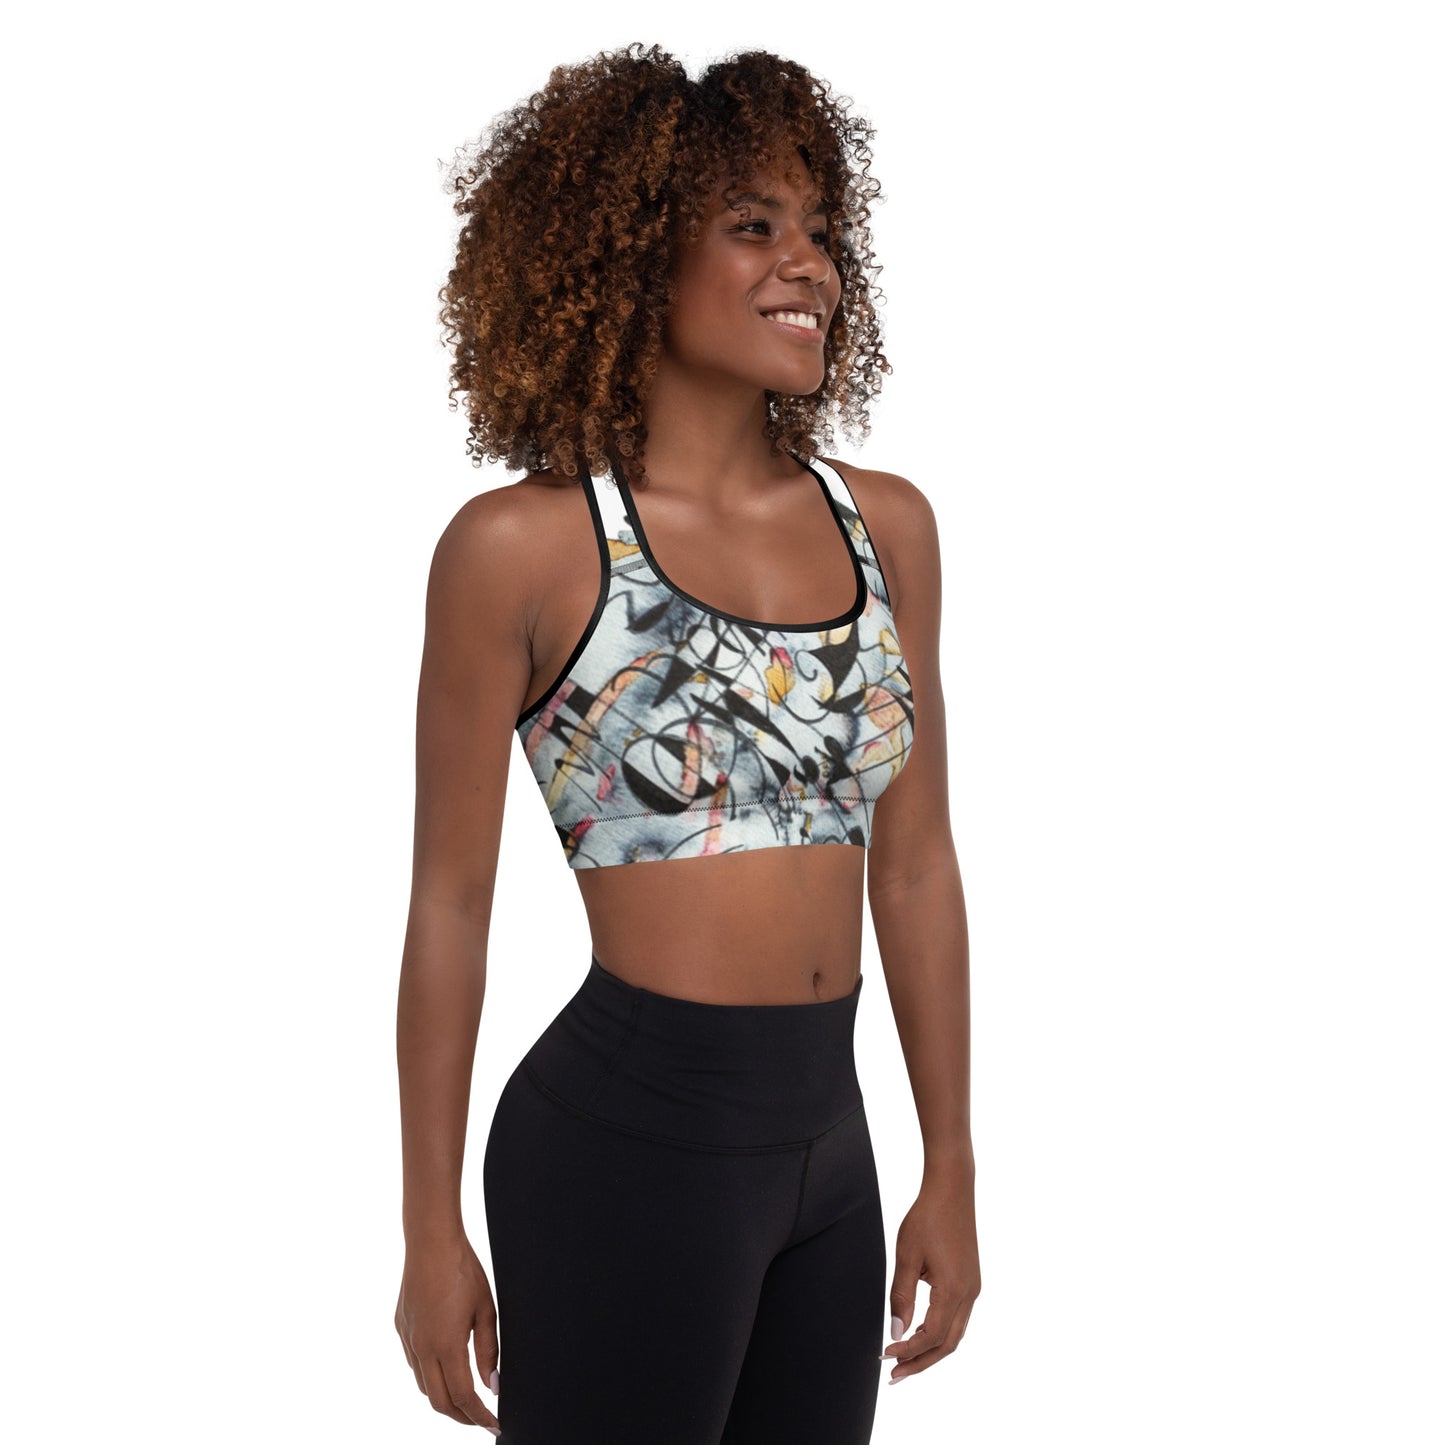 Fleeting Thoughts Abstract Padded Sports Bra